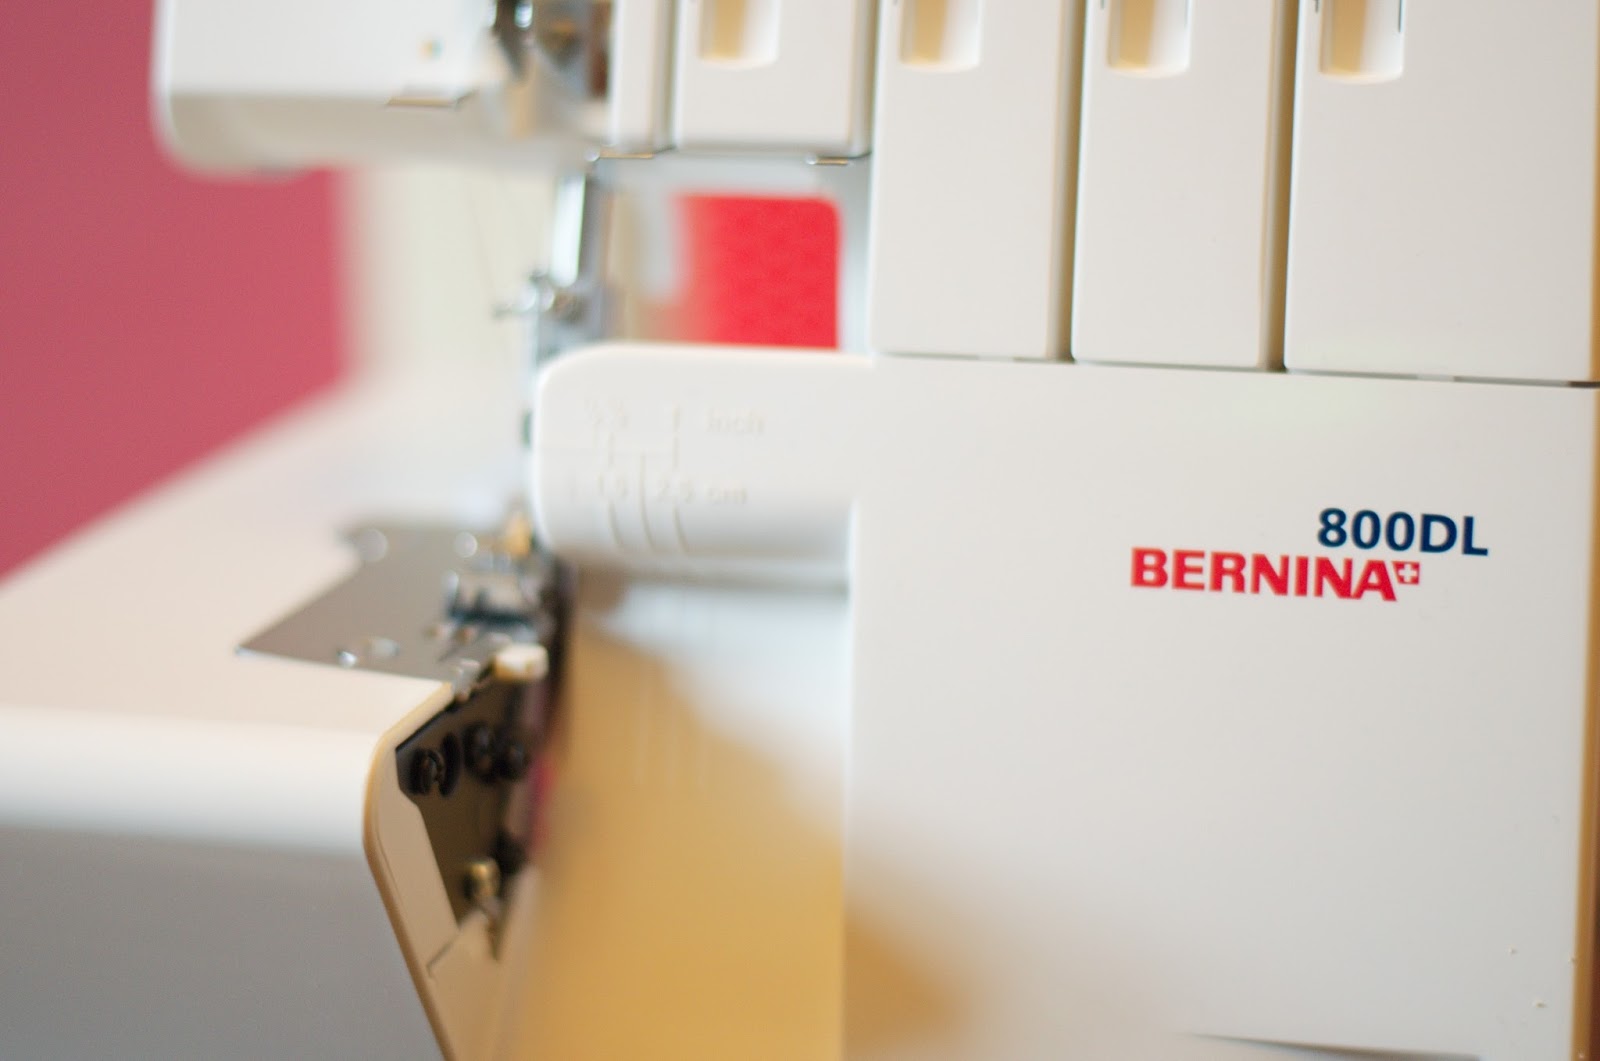 Sews And Doesn't Sleep: Review: Bernina 800DL